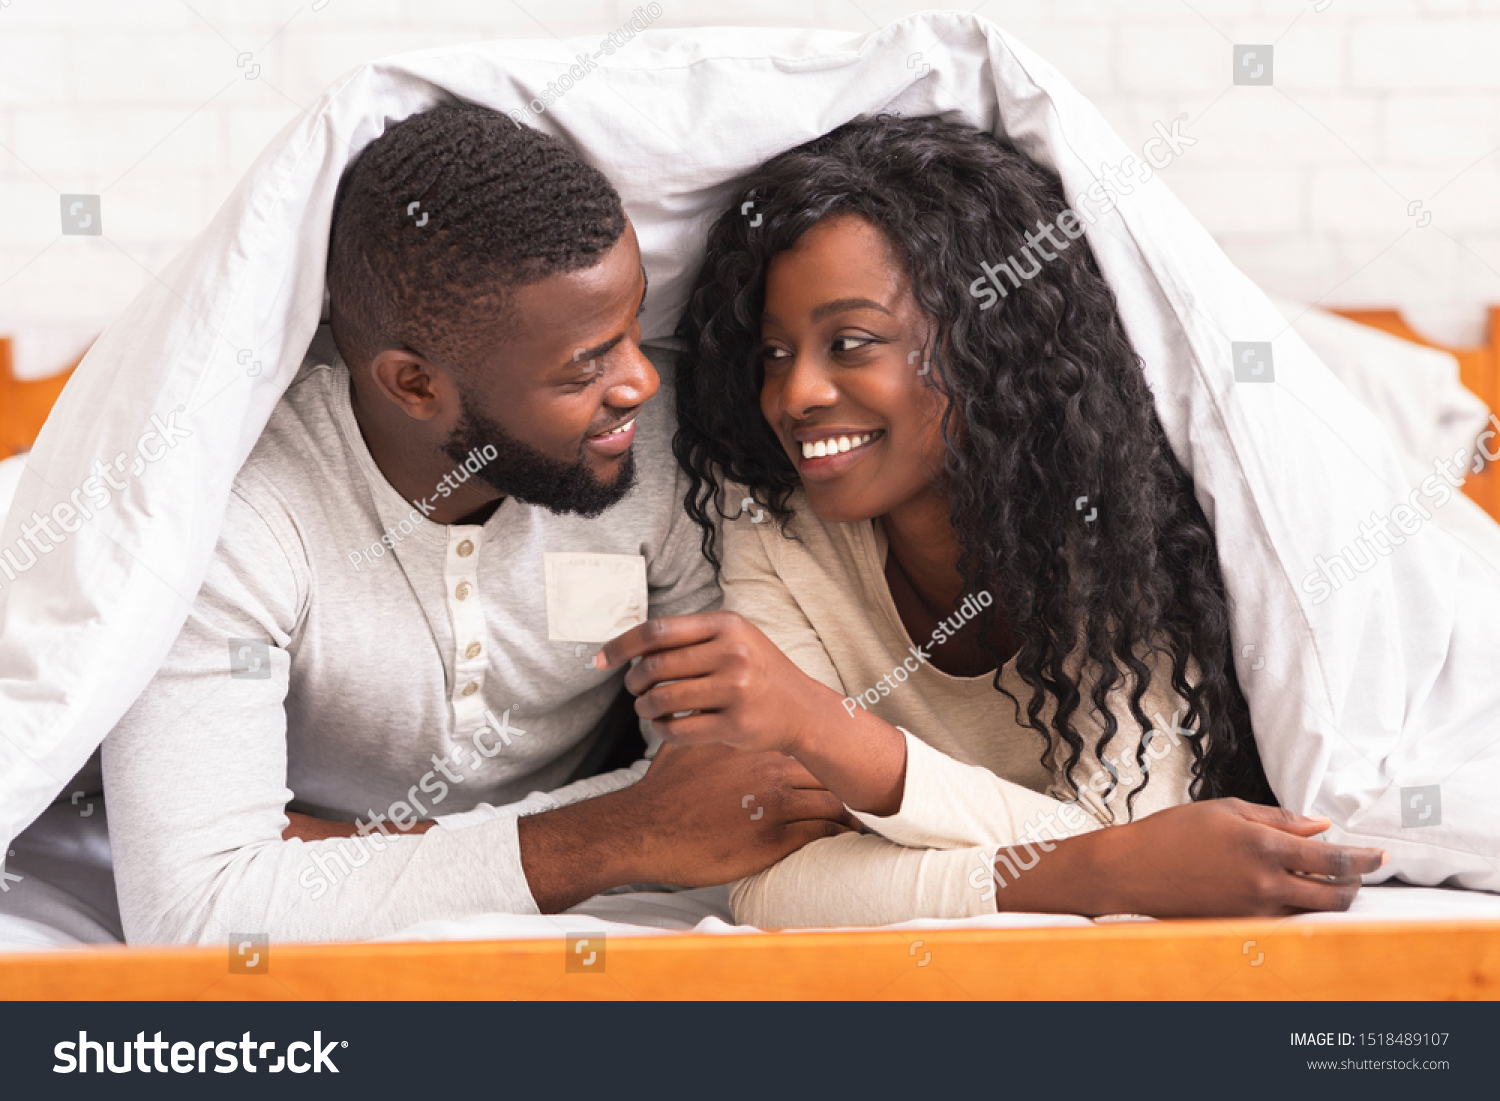 African american sex pictures